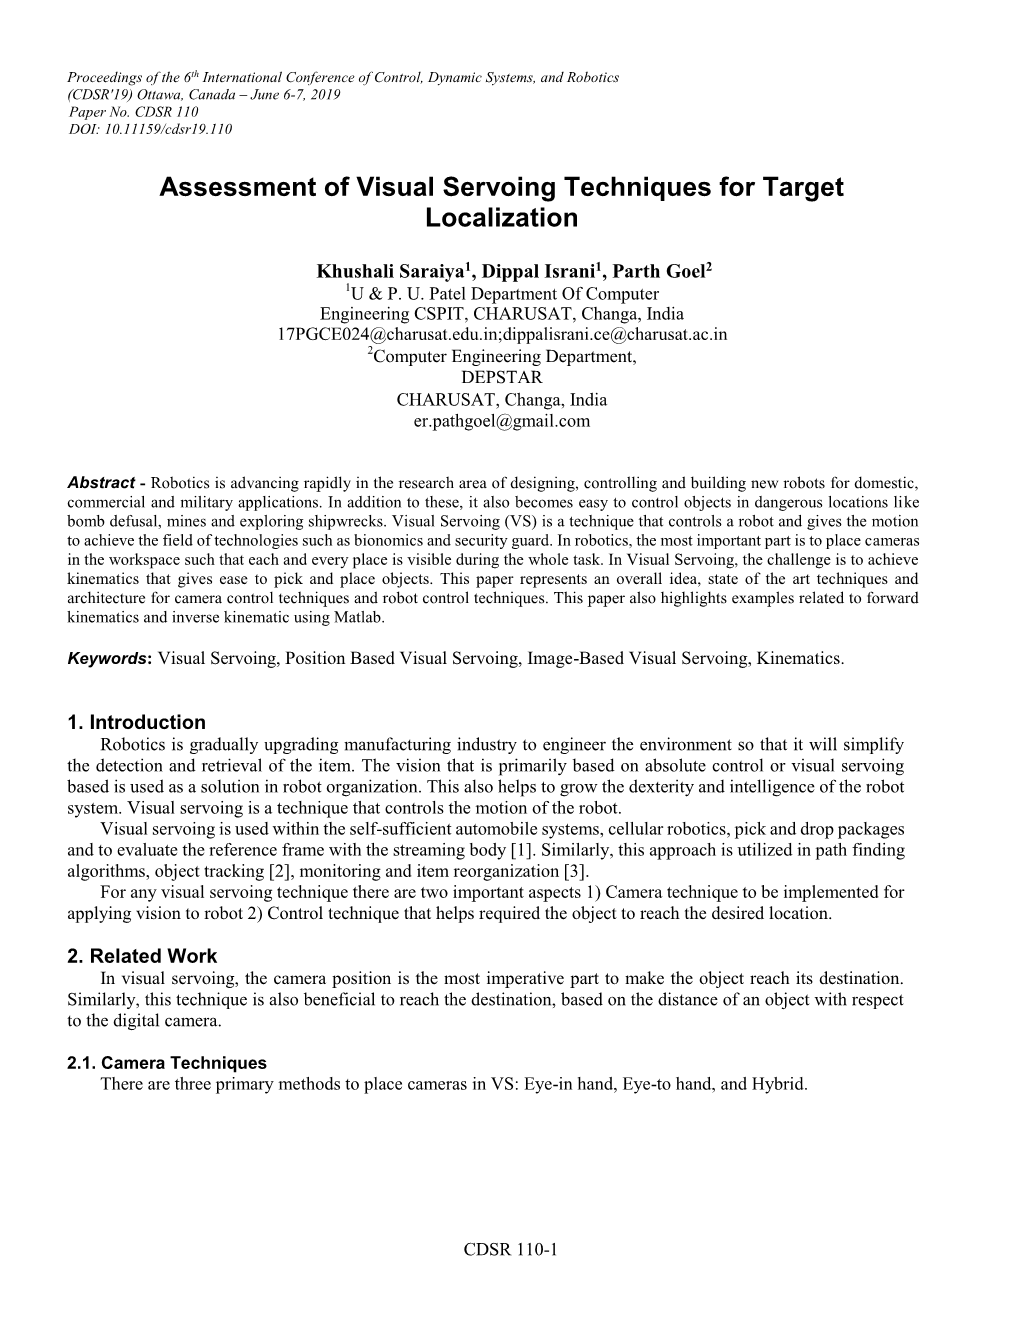 Assessment of Visual Servoing Techniques for Target Localization